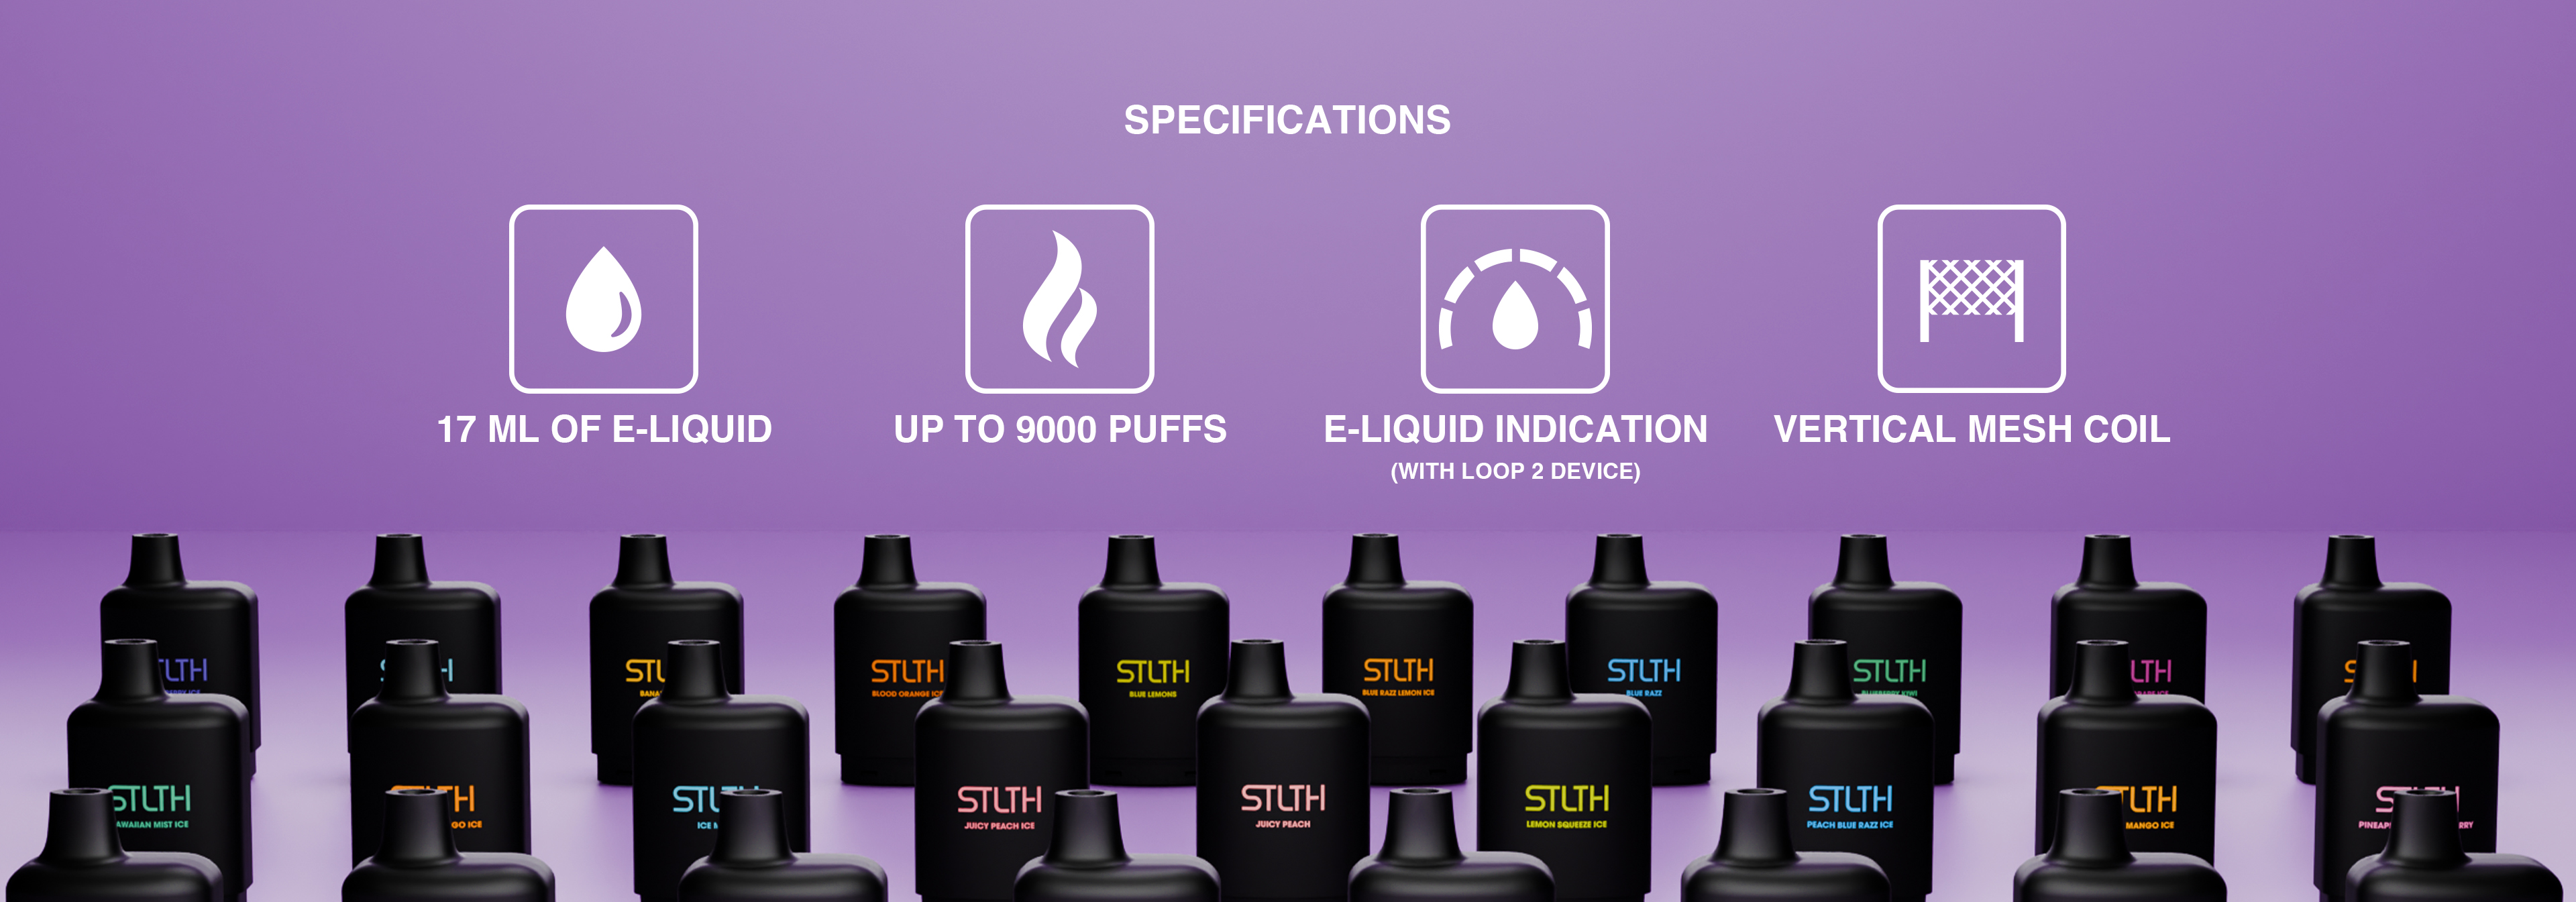 SPECIFICATIONS: 17 ML OF E-LIQUID. UP TO 9000 PUFFS. E-LIQUID INDICATION (WITH LOOP 2 DEVICE). VERTICAL MESH COIL.